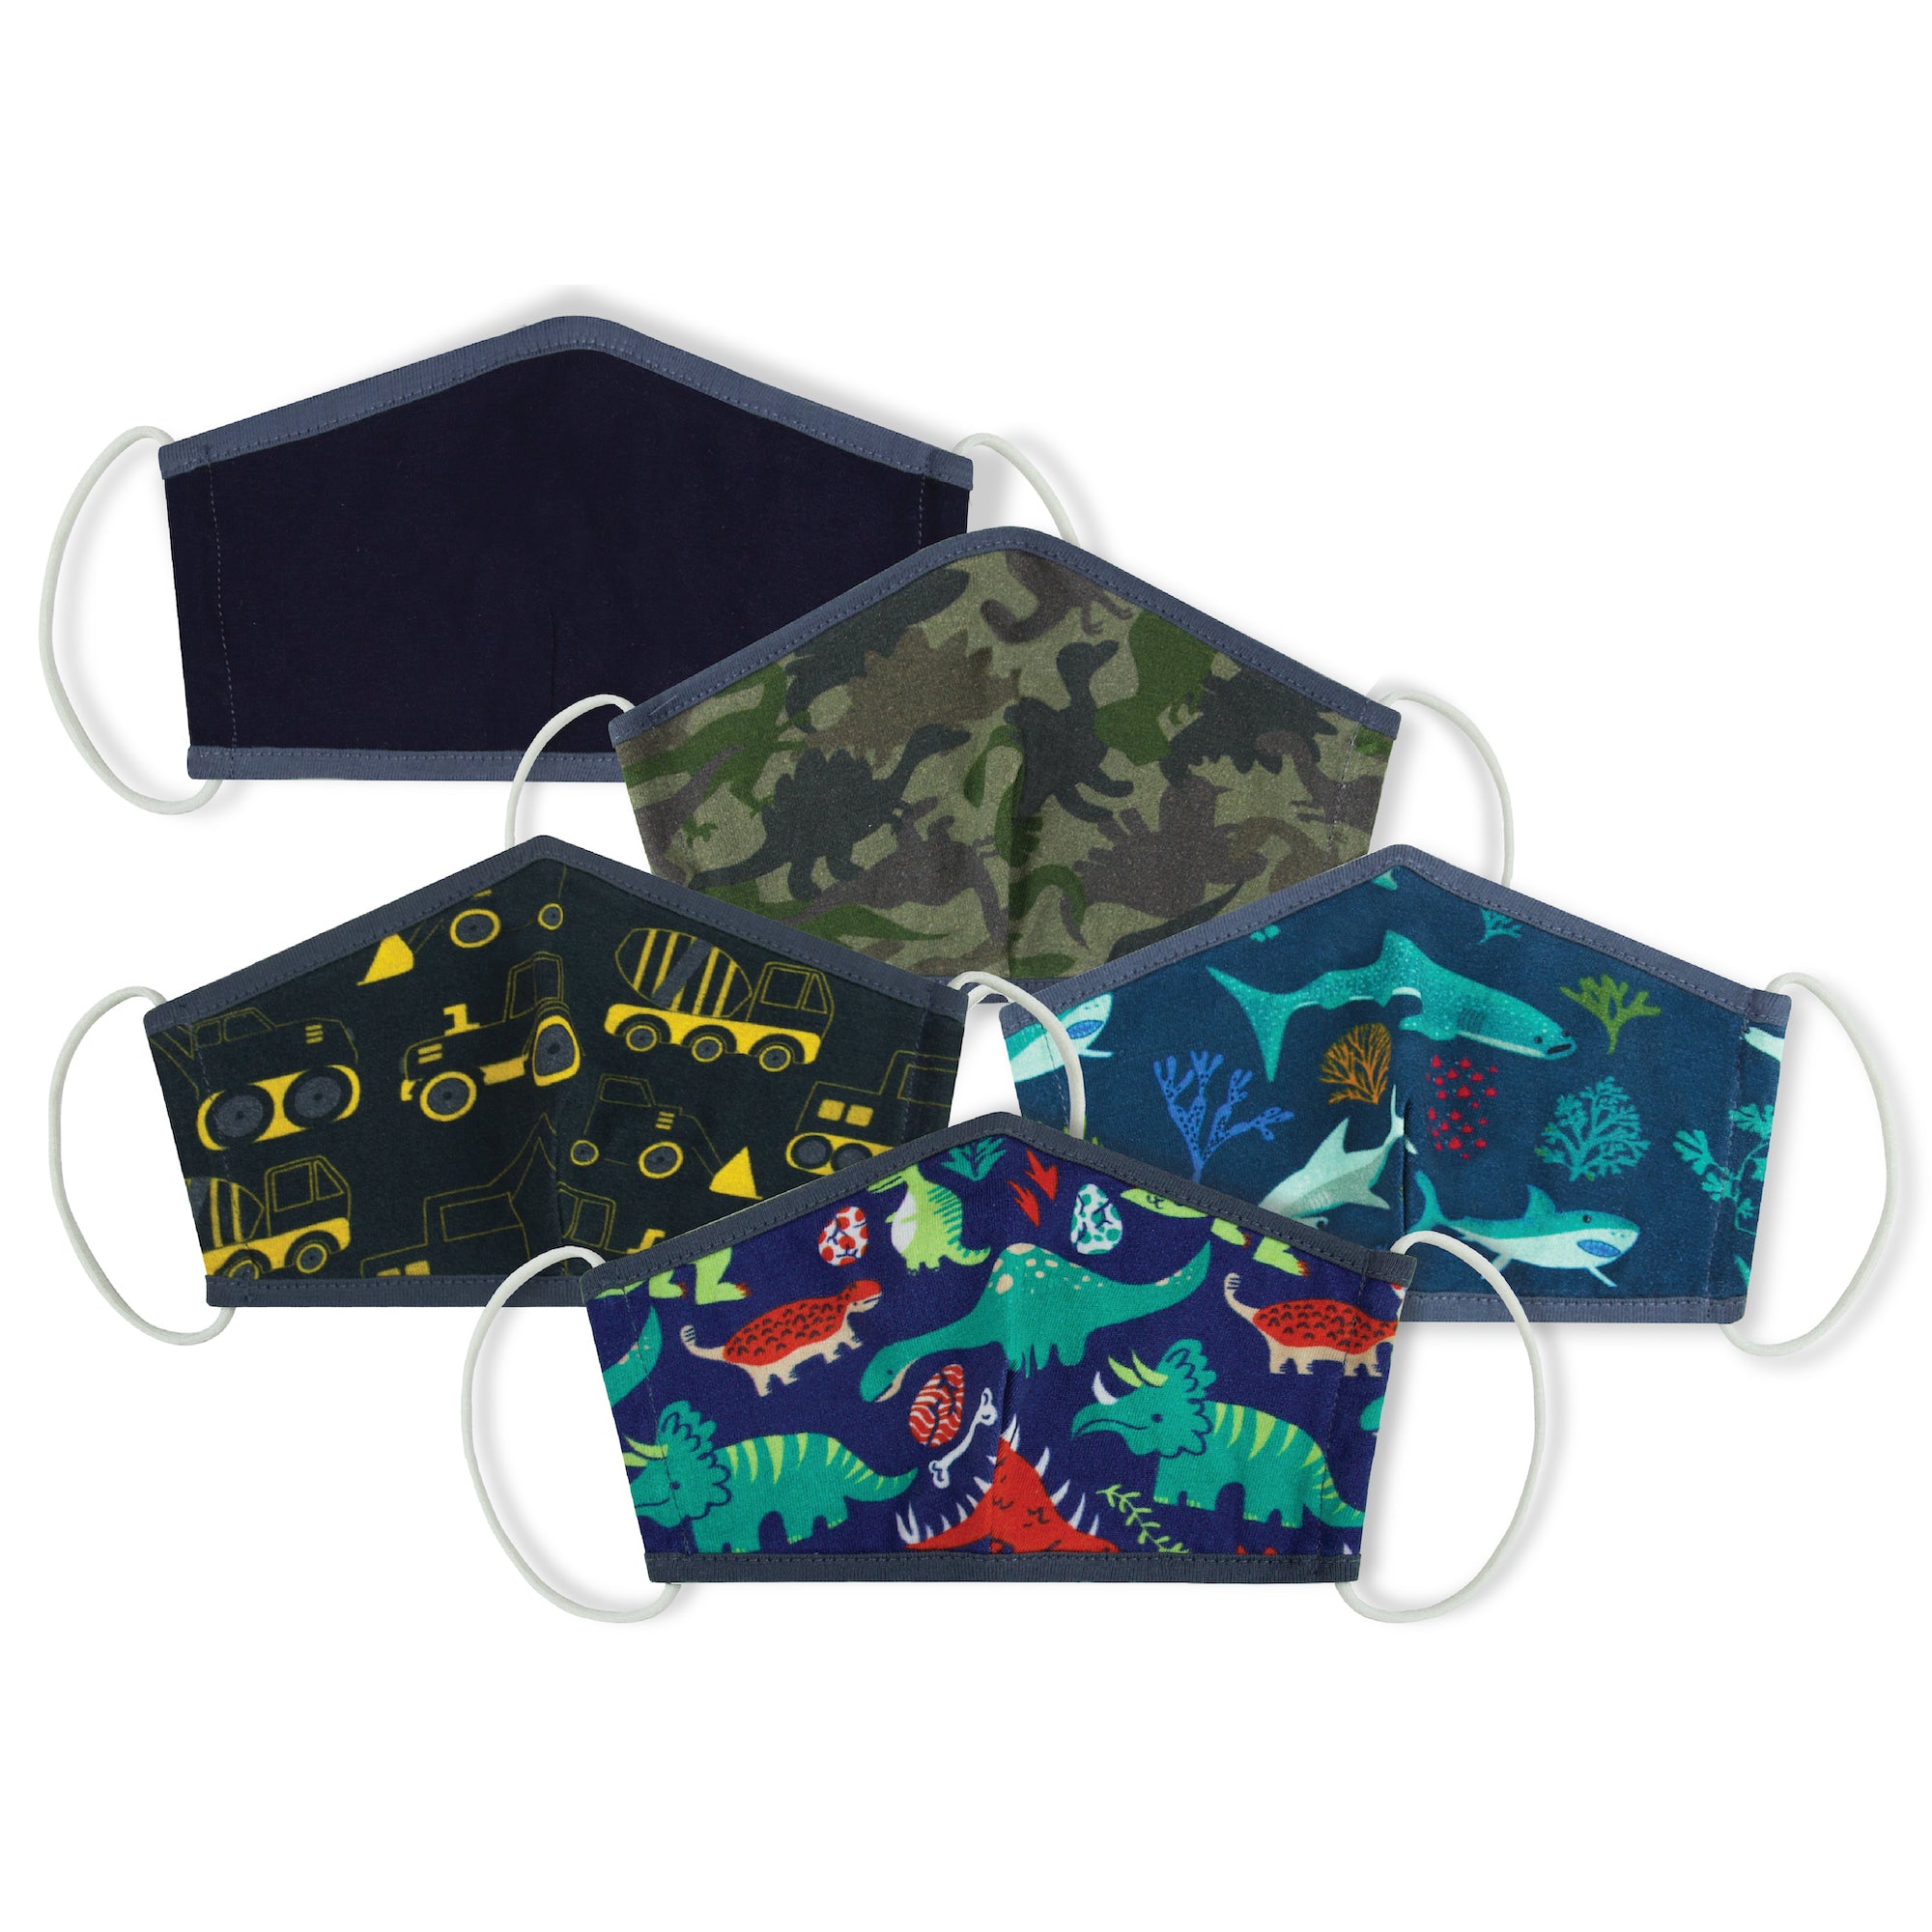 LONECONE Variety 5-Pack - Sharks & Dinos Reusable Face Masks